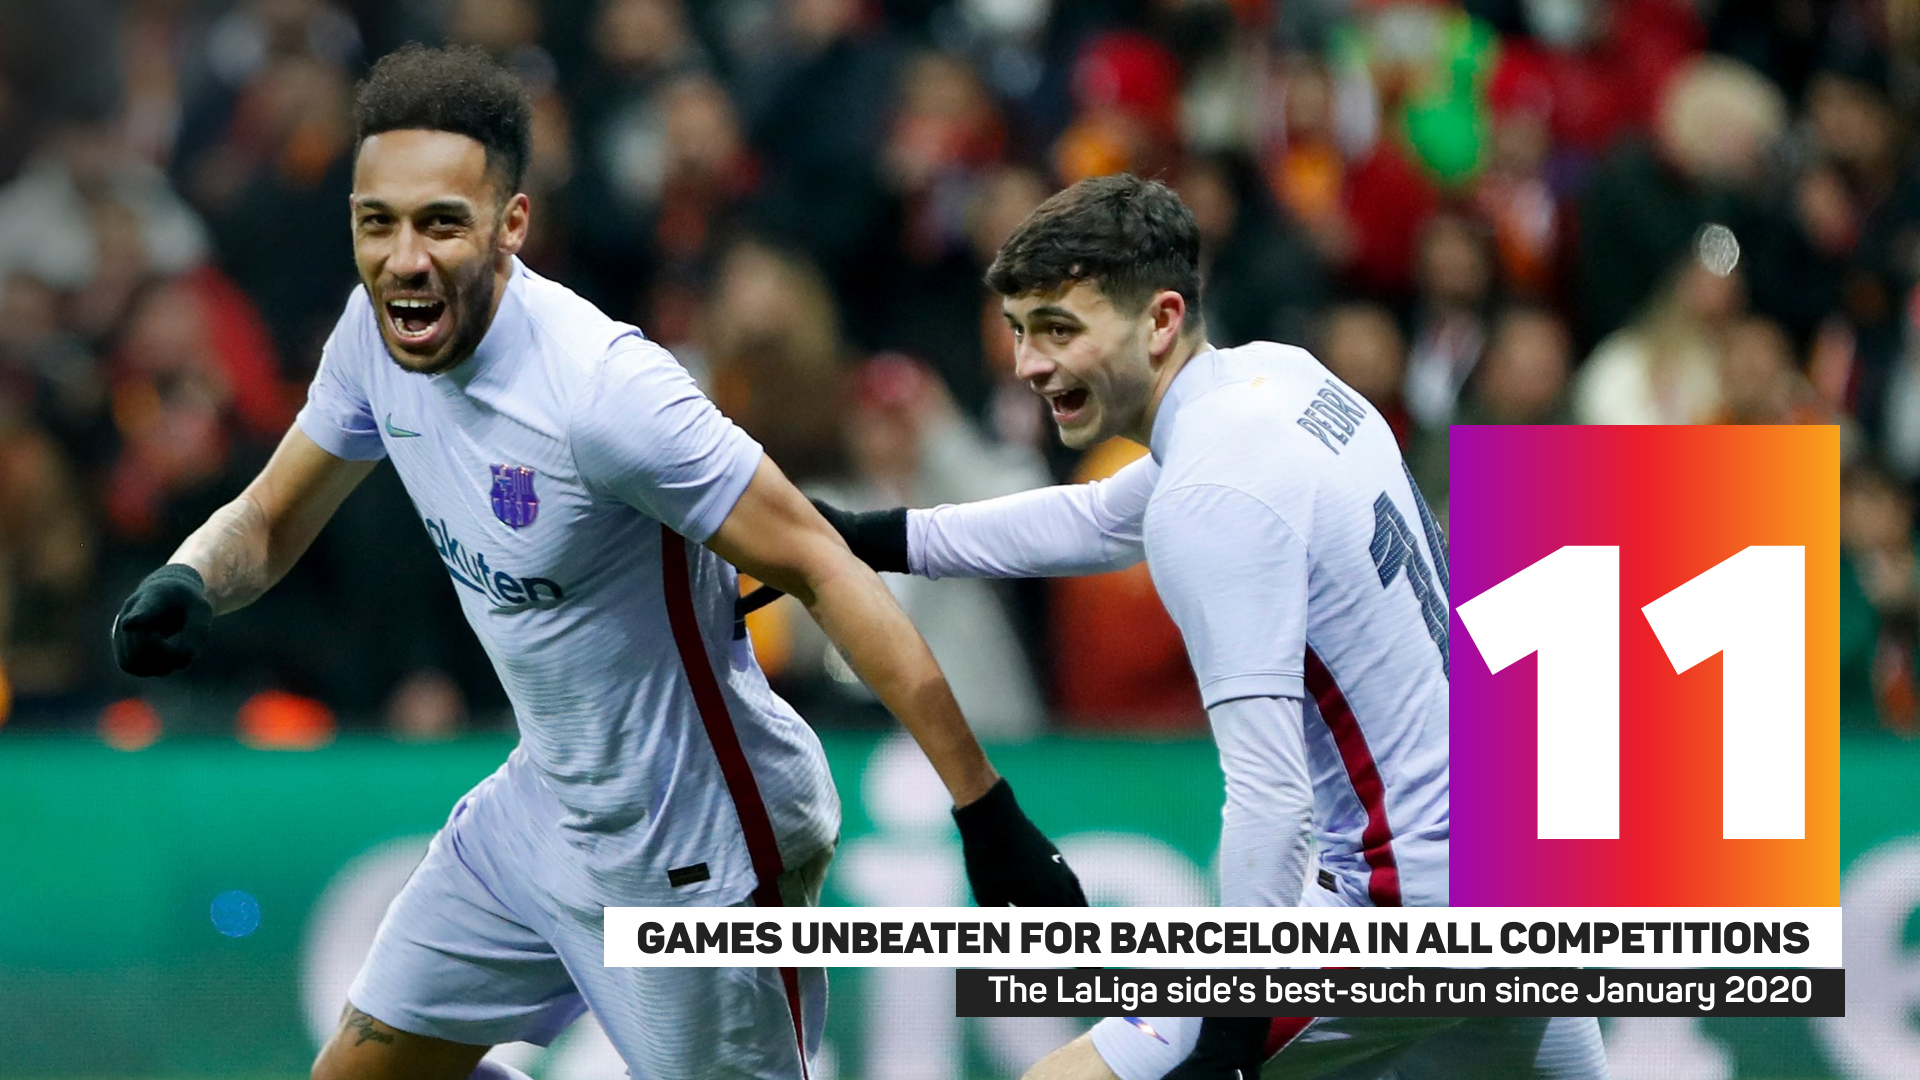 Barcelona are unbeaten in 11 matches